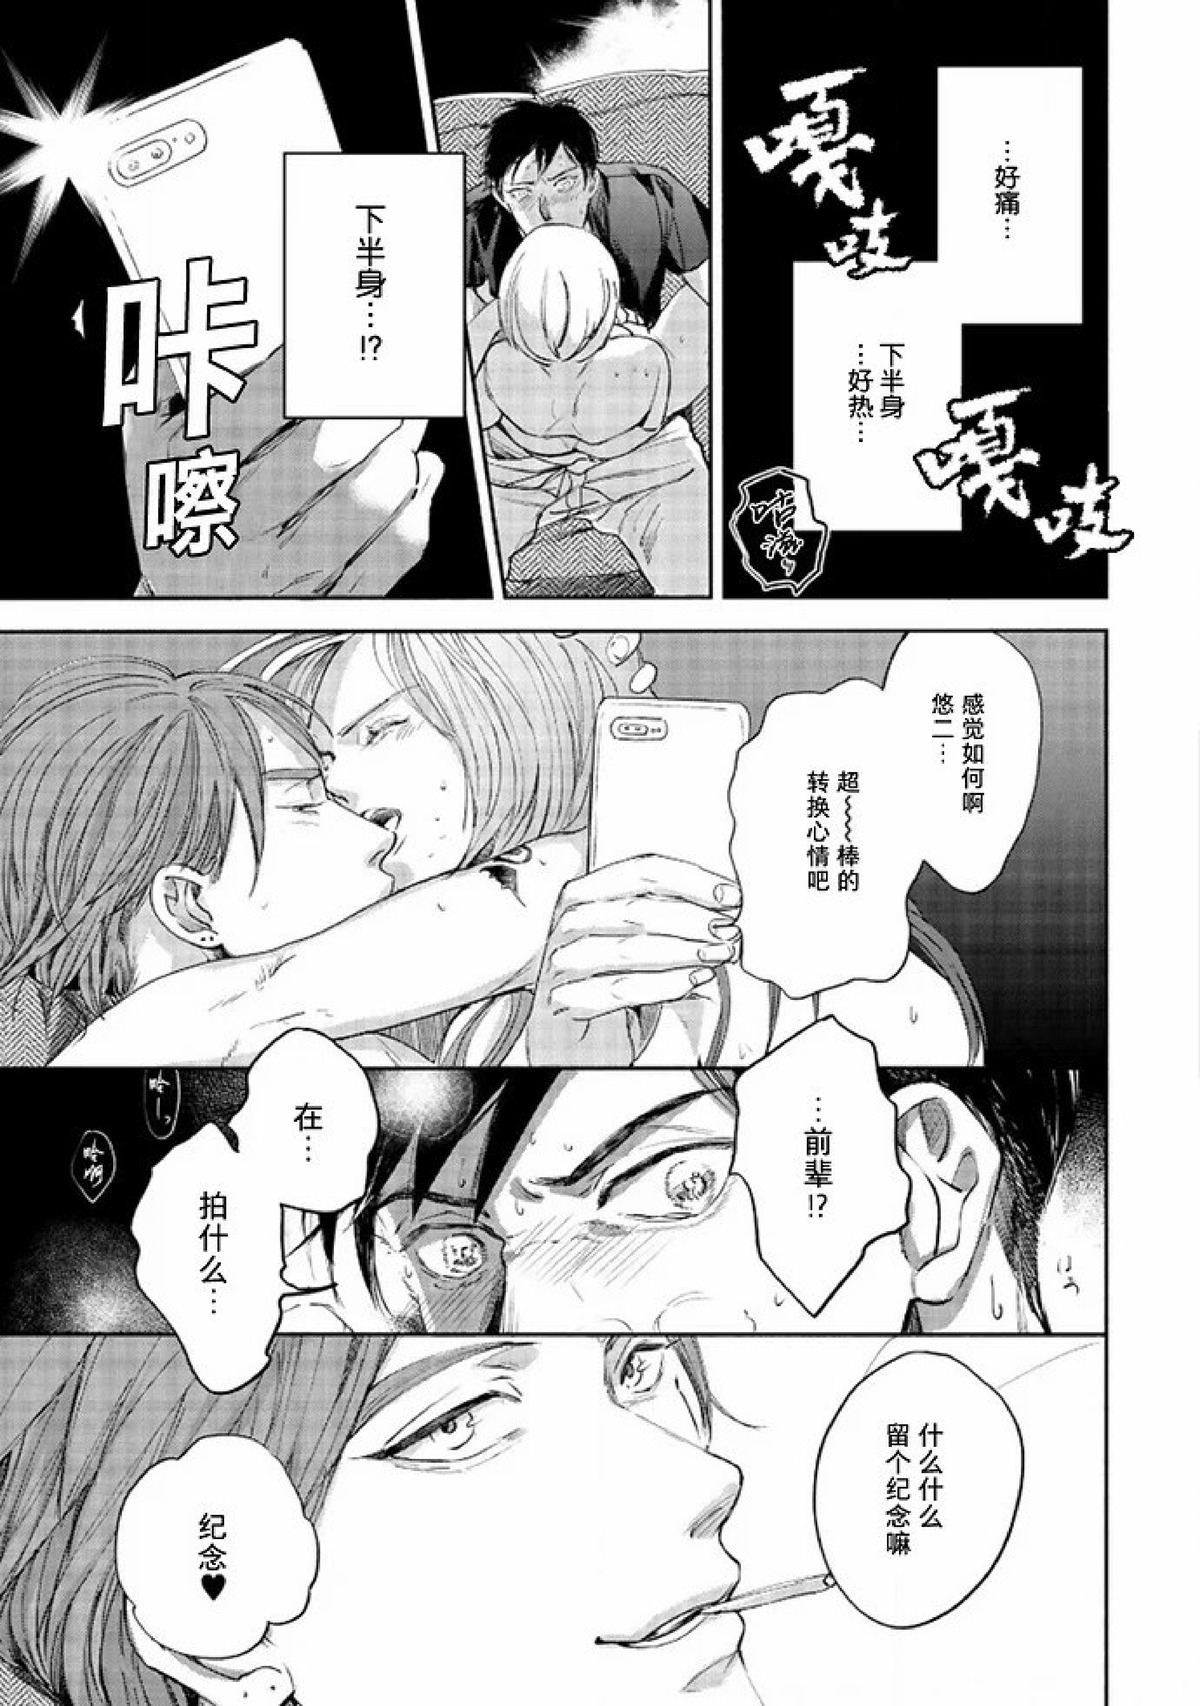 【Two sides of the same coin[腐漫]】漫画-（上卷01-02）章节漫画下拉式图片-45.jpg